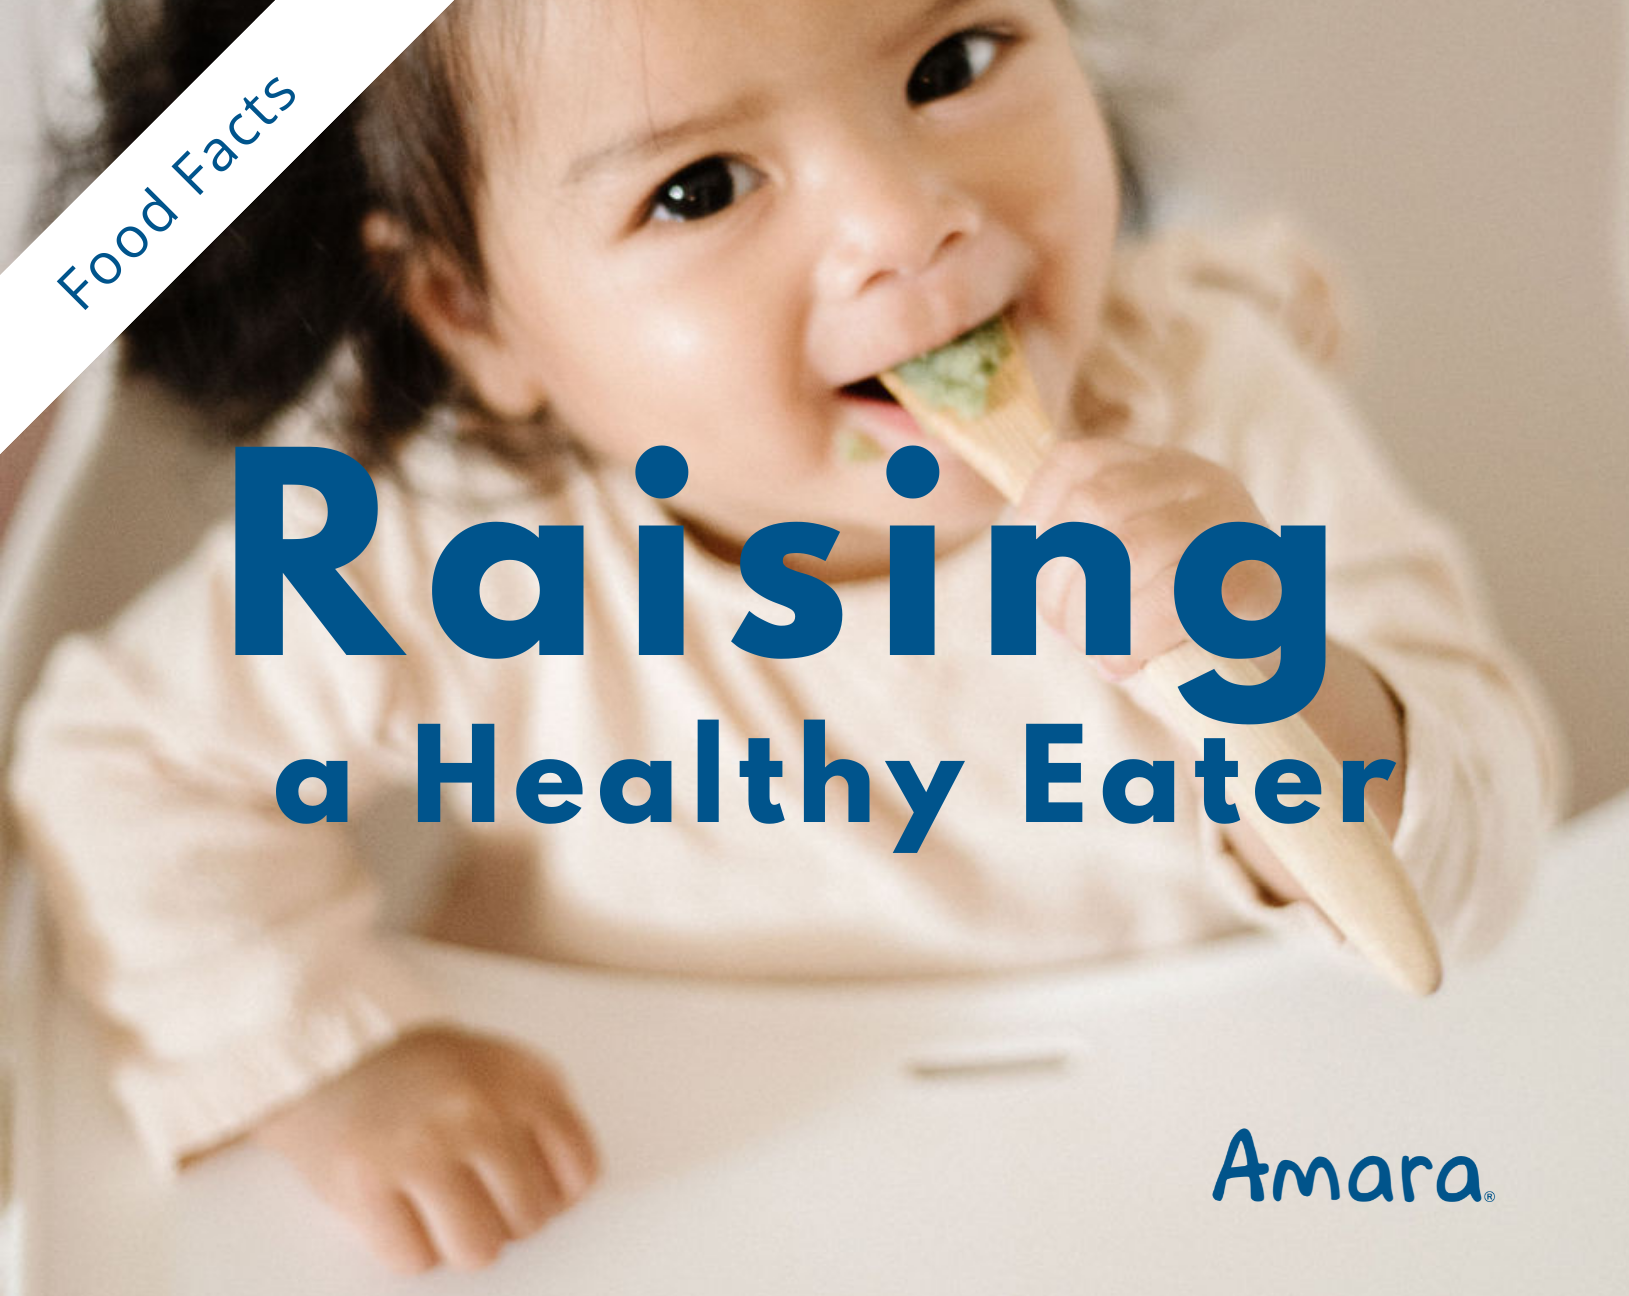 raising a healthy eater from babyhood